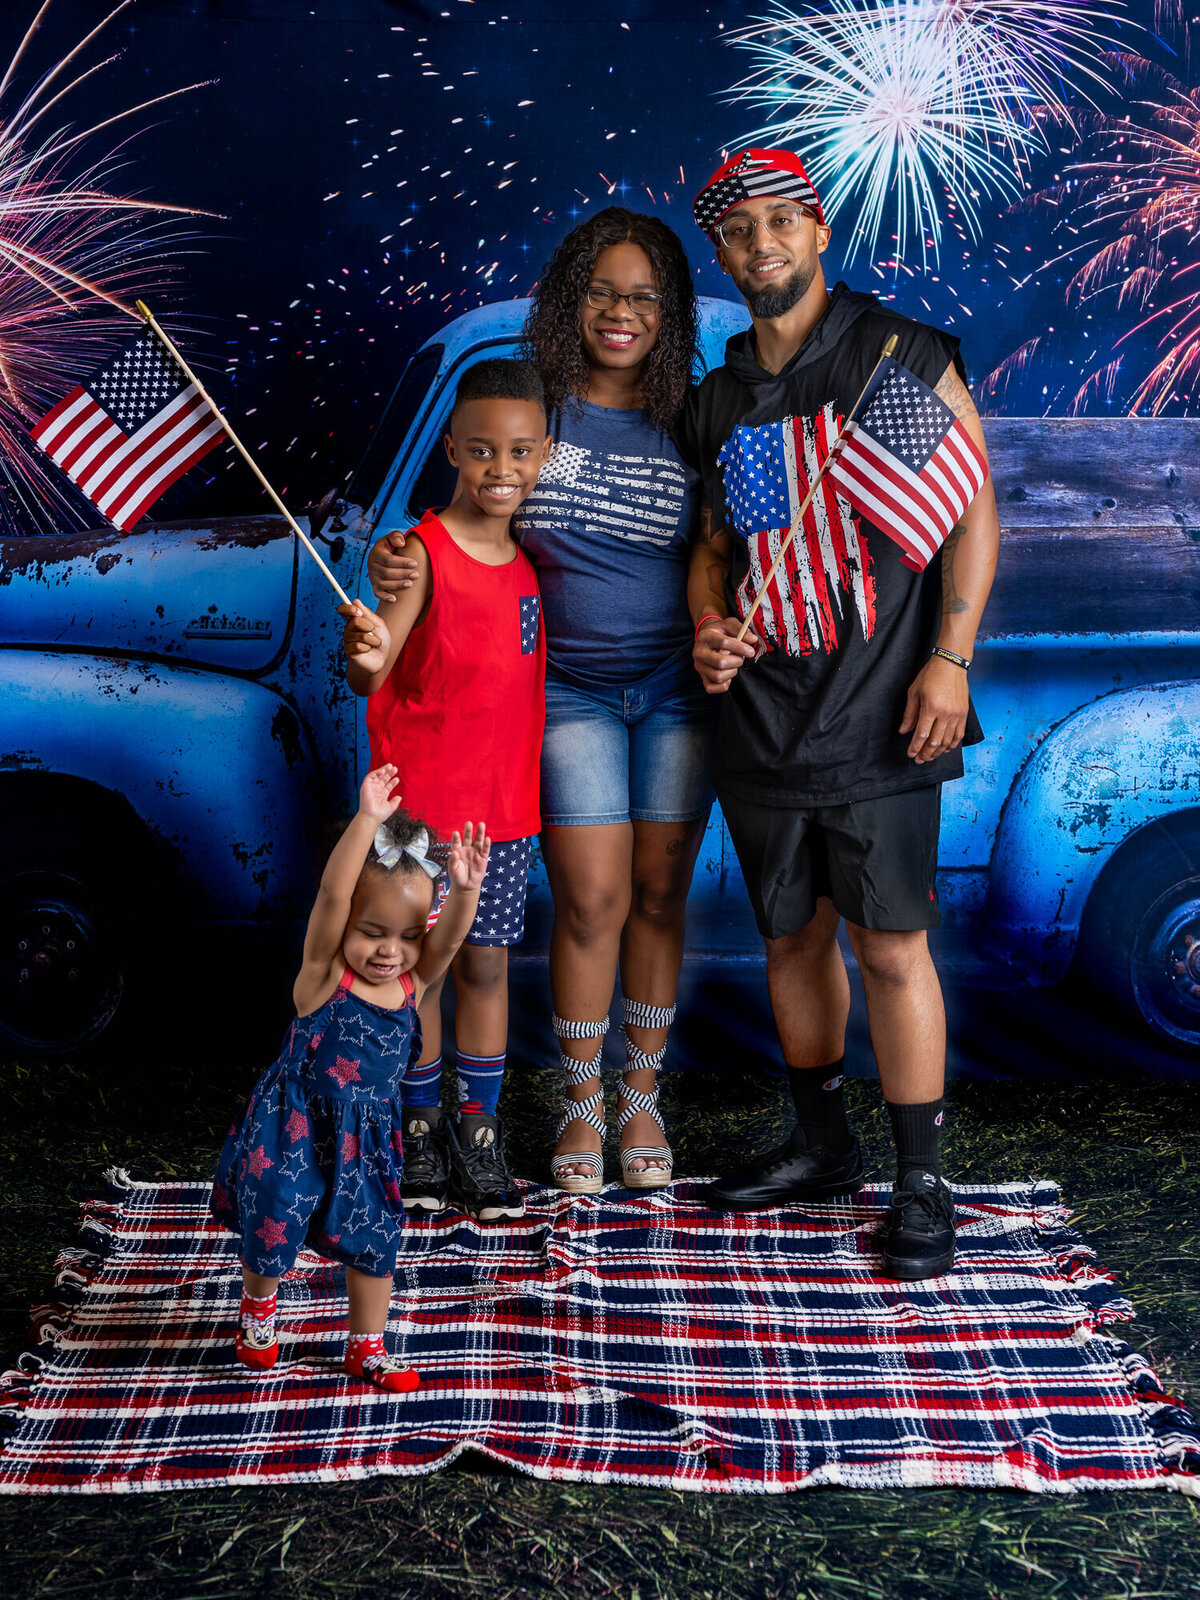 Prescott family photos with a July 4th fireworks theme